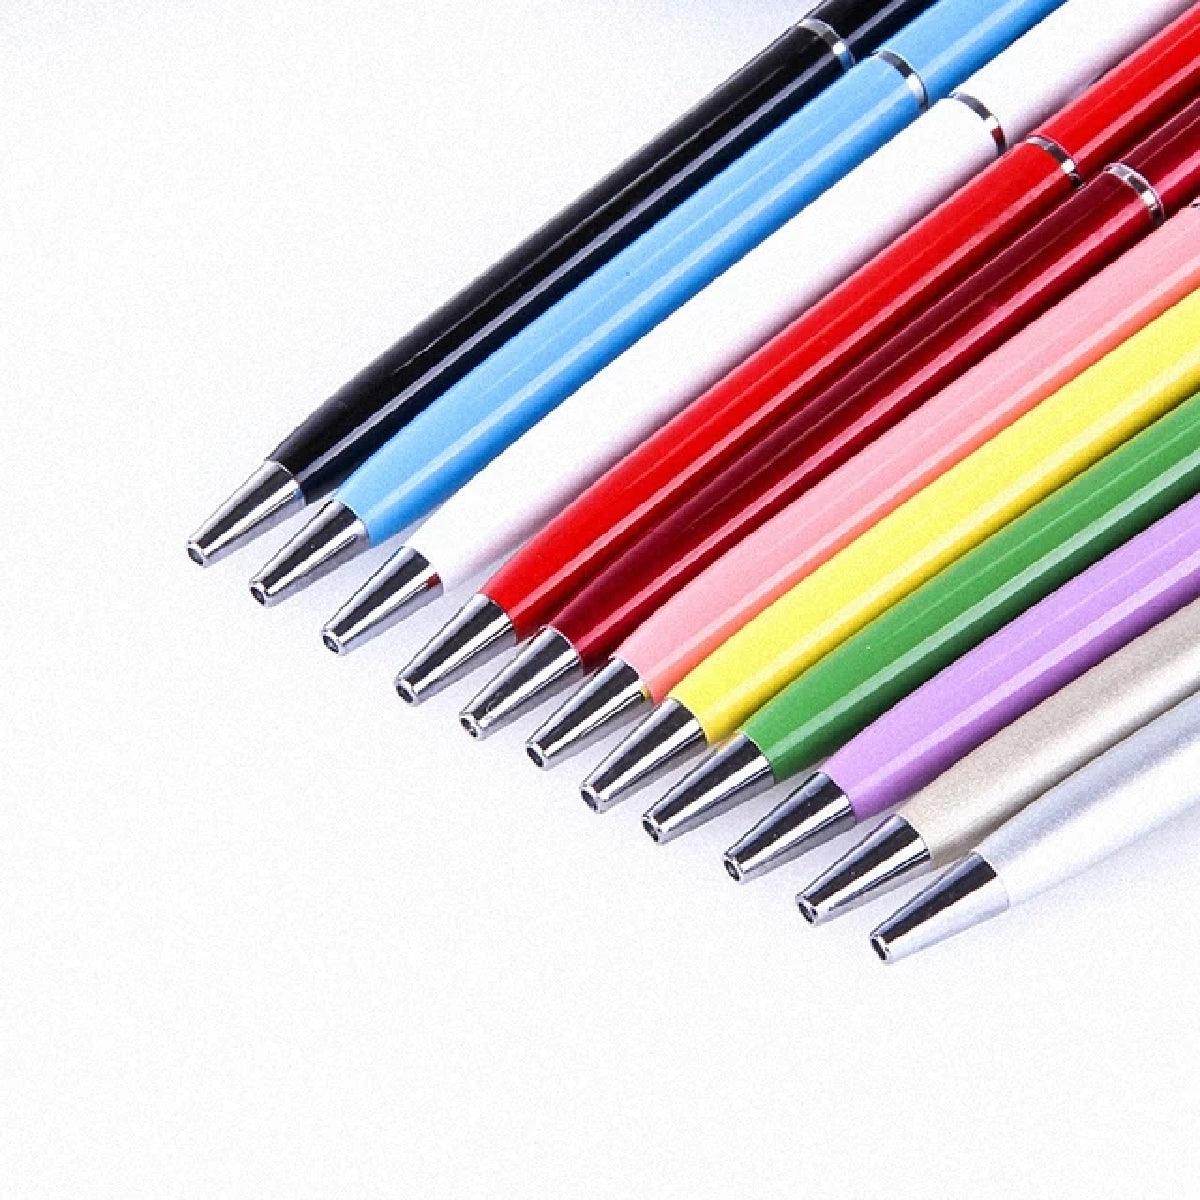 Smart 2 in 1 Ball Point Pen with Stylus - Universal, 10 Pcs